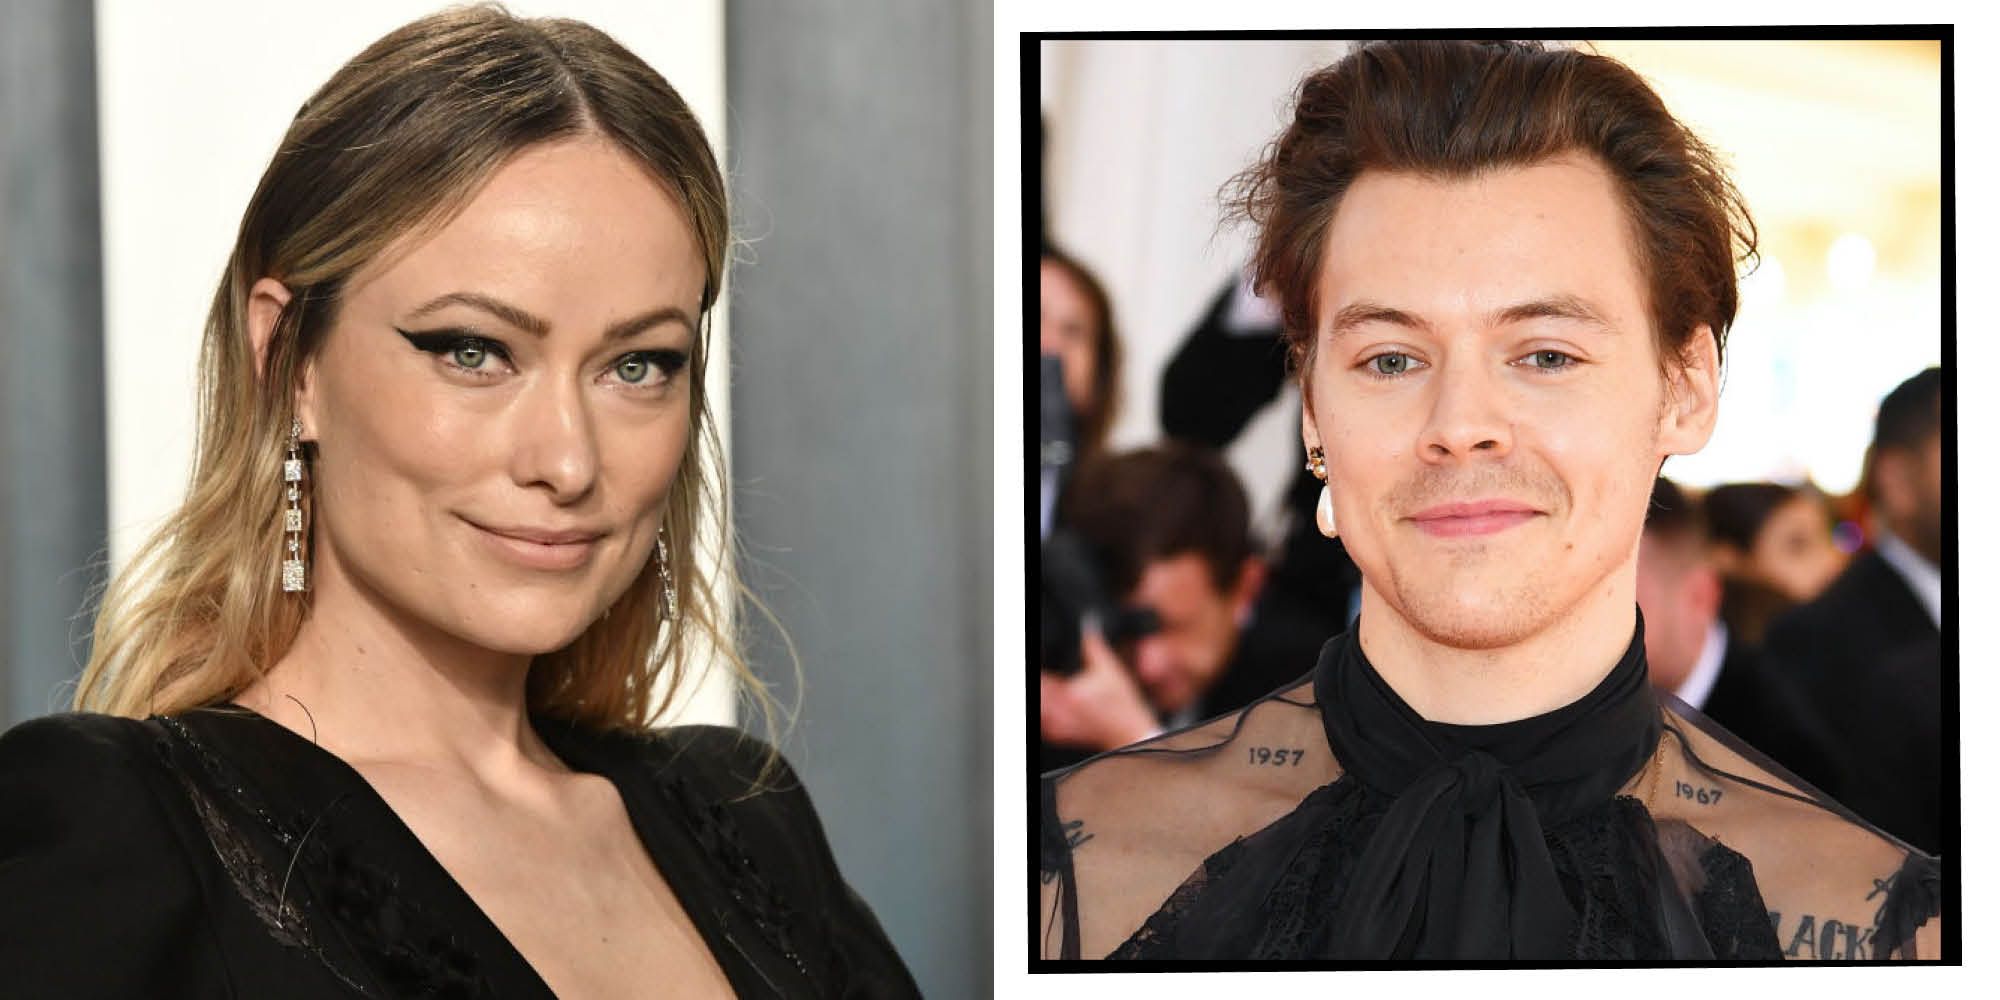 Harry Styles marriage rumours as he 'introduces' girlfriend Olivia Wilde to  mum - Birmingham Live